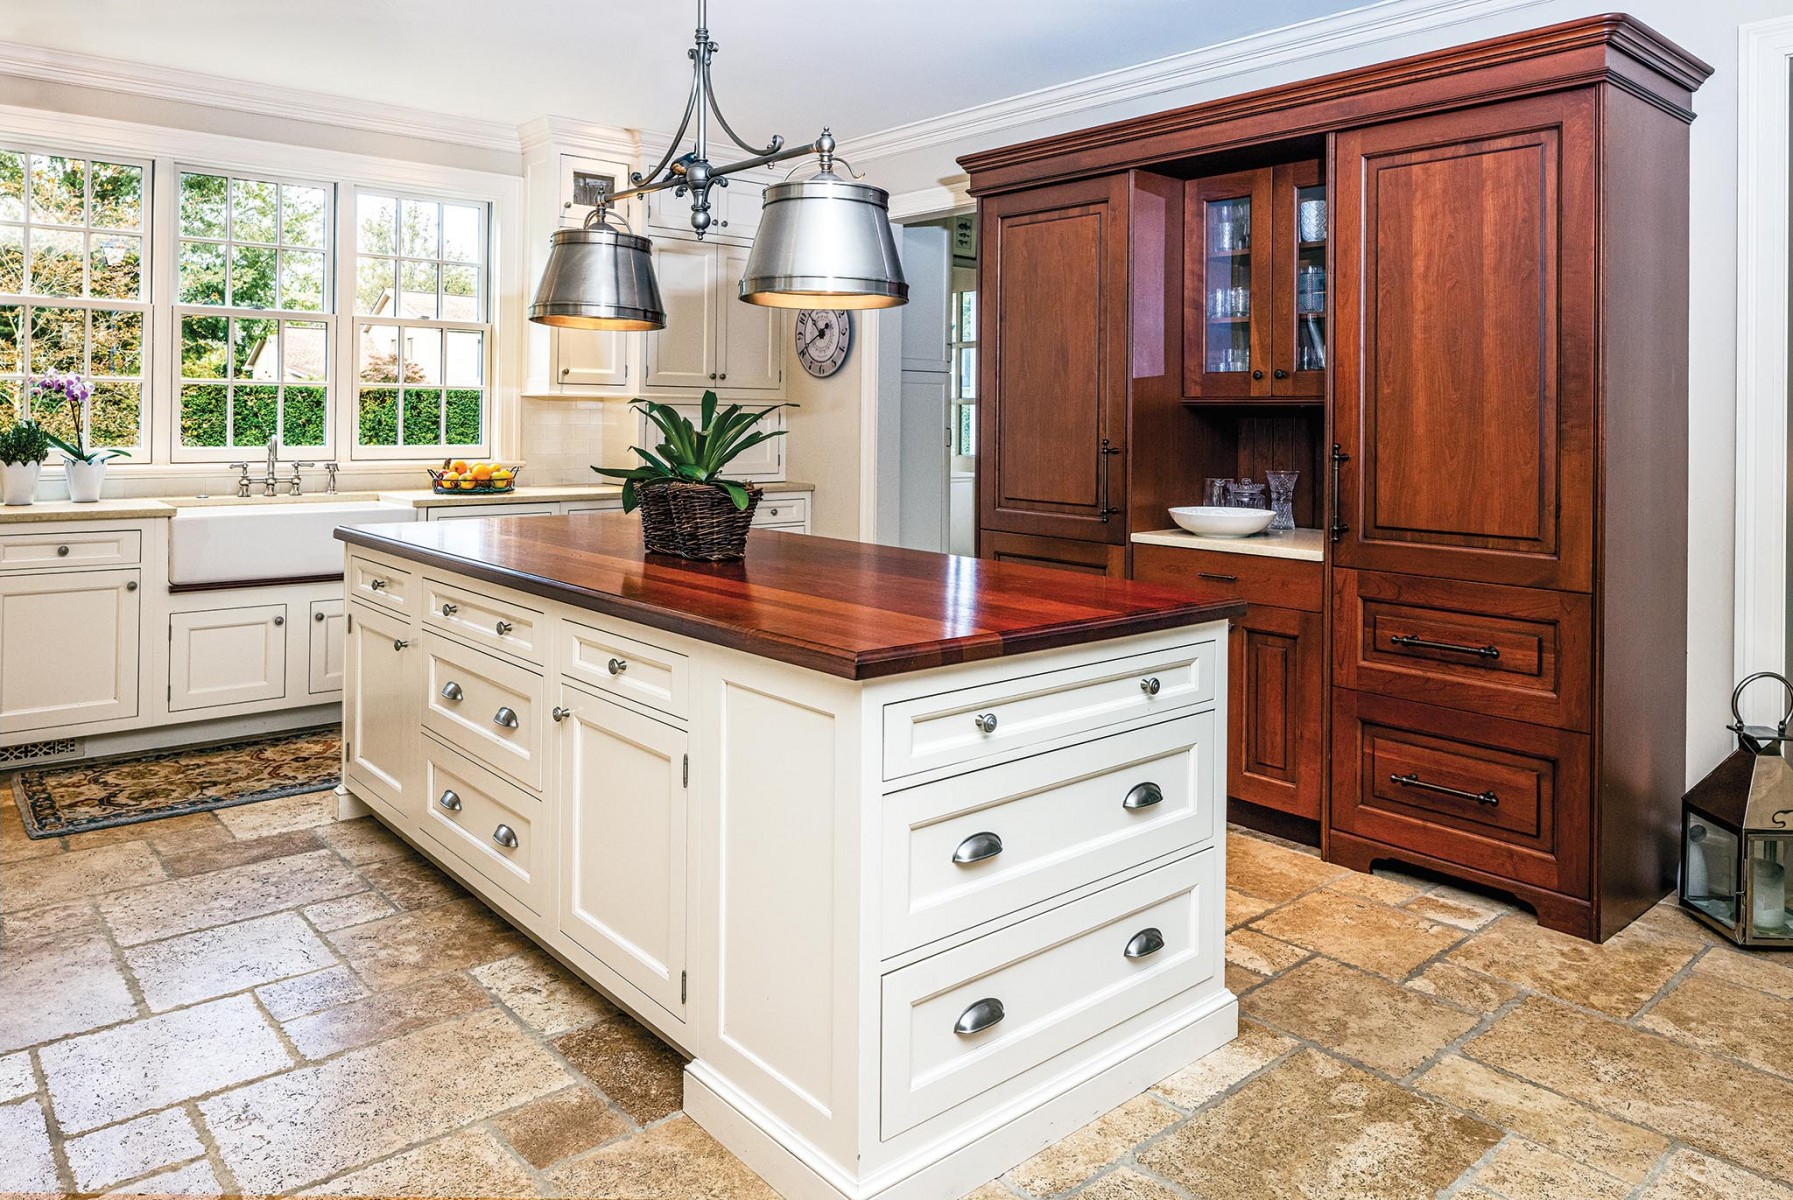 Kitchen Charm:
The island by Wood-Mode is the centerpiece of the kitchen, with a light fixture by Visual Comfort.